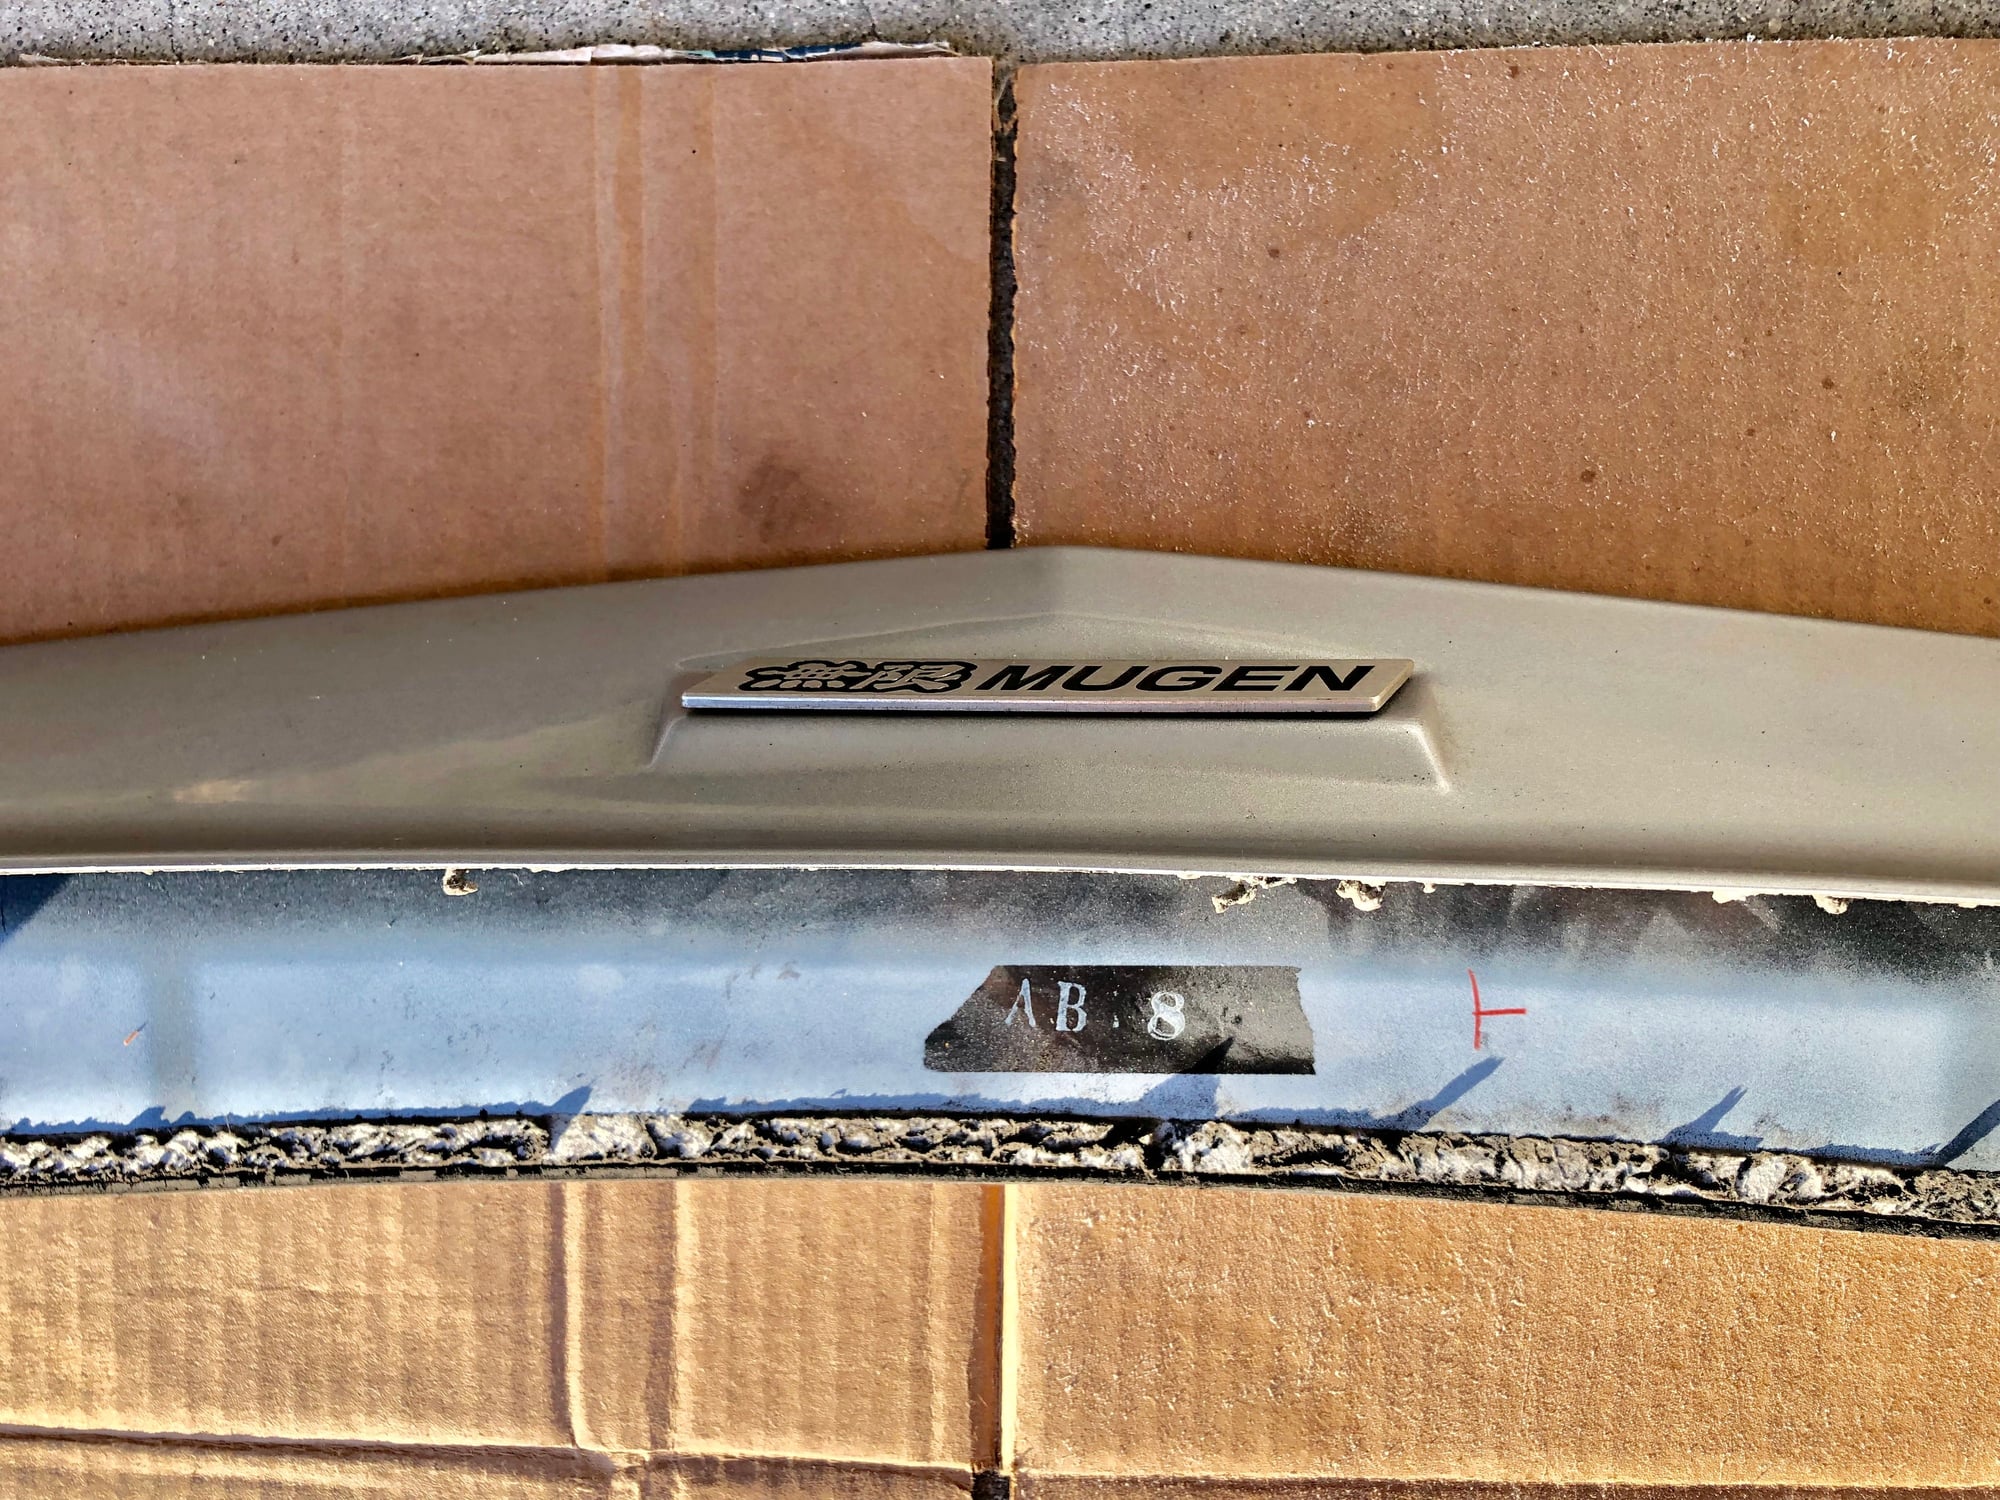 Exterior Body Parts - FS: 2G TL Mugen Spoiler and Honda Inspire Parts - Used - 1999 to 2003 Acura TL - Burbank, CA 91504, United States